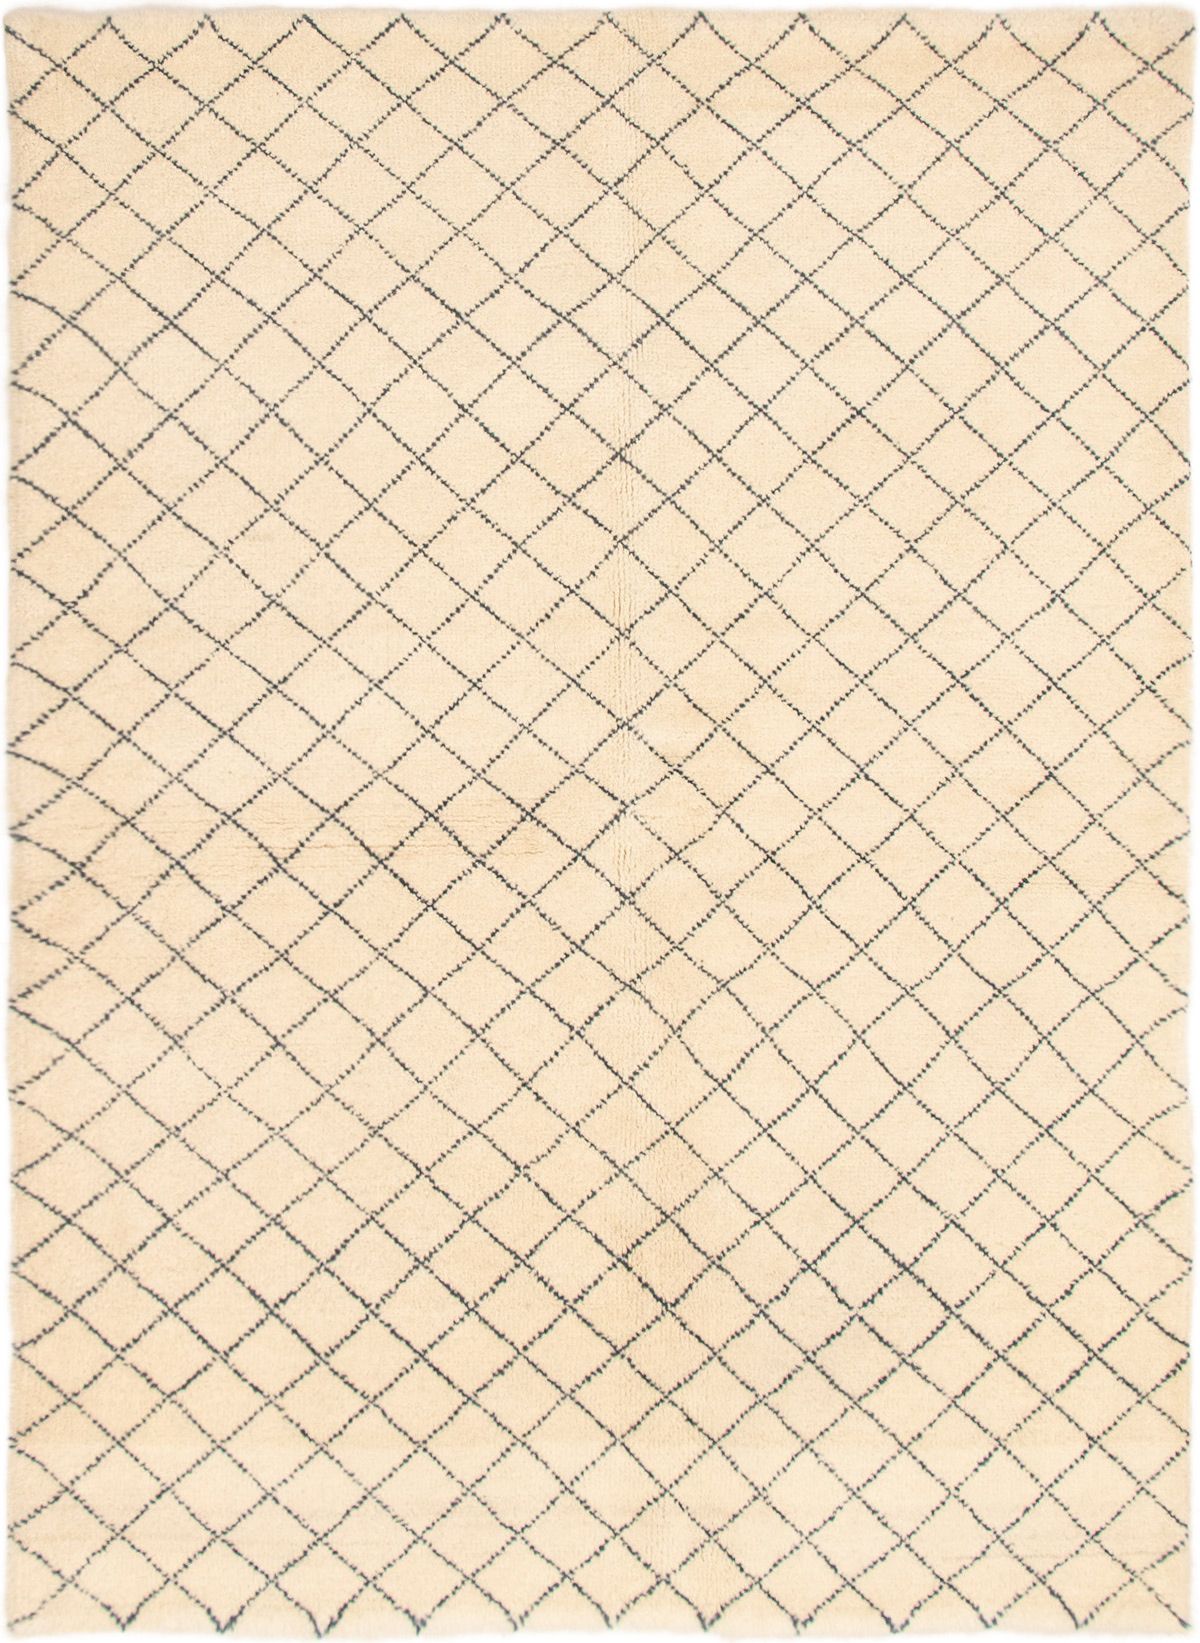 Hand-knotted Arlequin Cream Wool Rug 6'2" x 8'10"  Size: 6'2" x 8'10"  